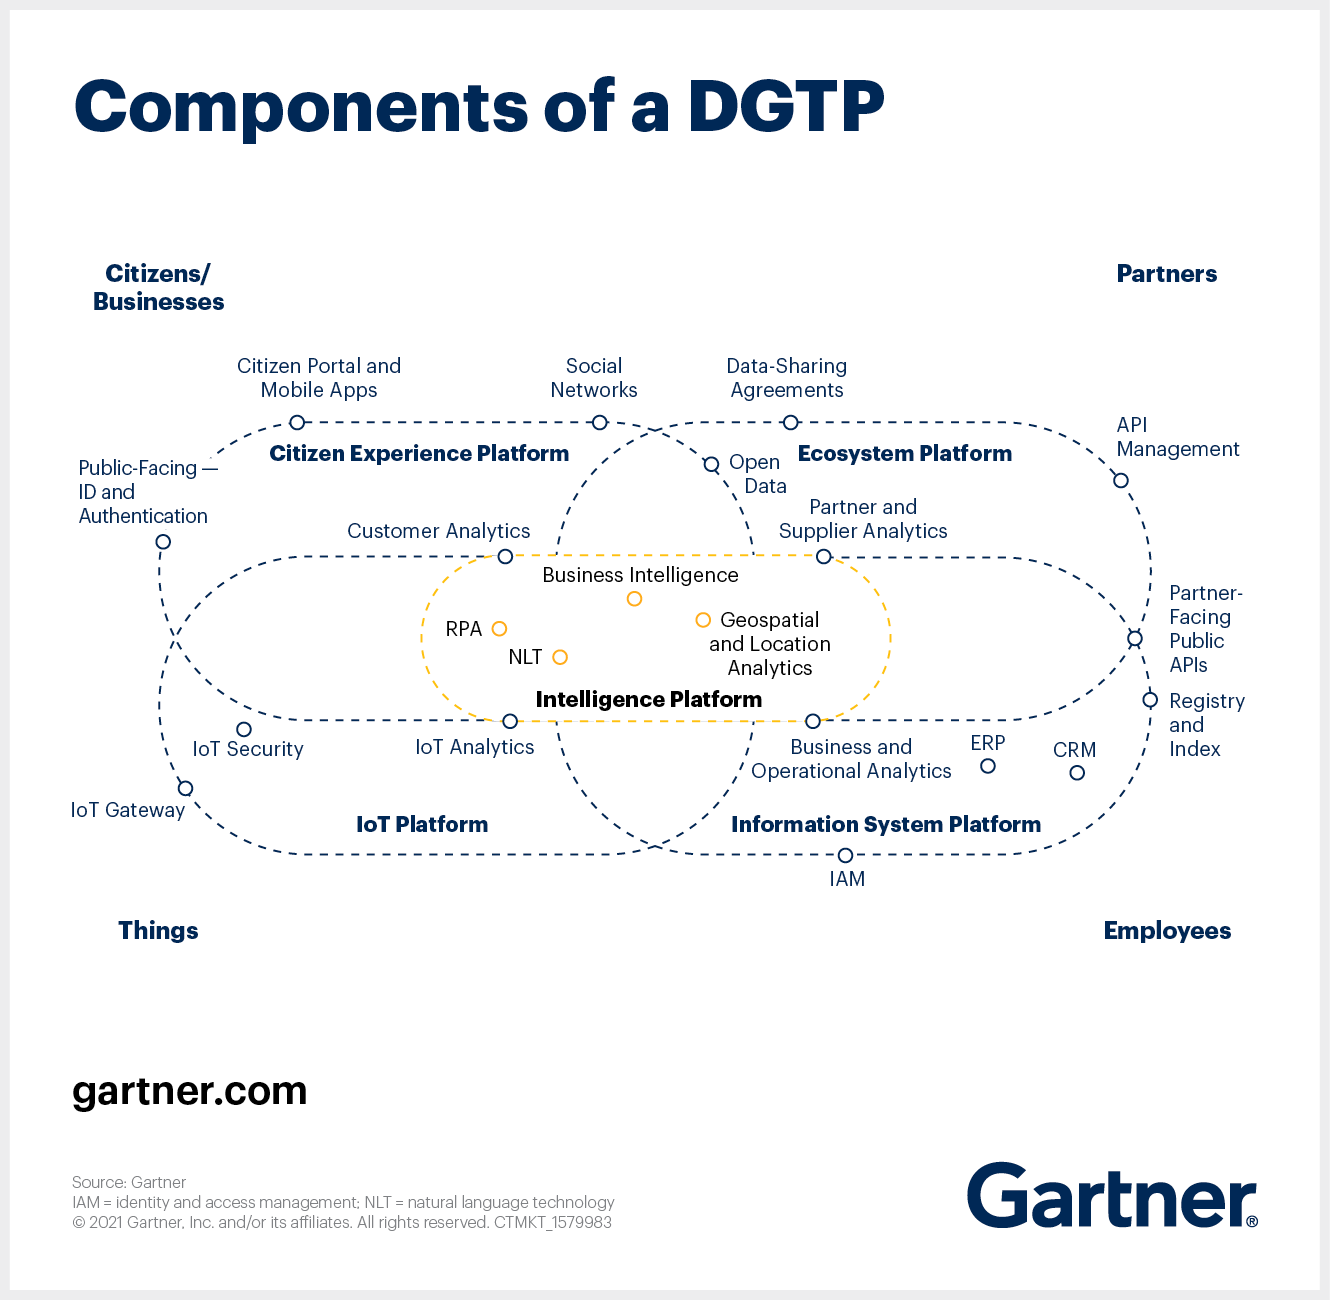 DGTP is a set of cross-cutting, integrated, horizontal capabilities that coordinate government services across multiple domains and platforms.